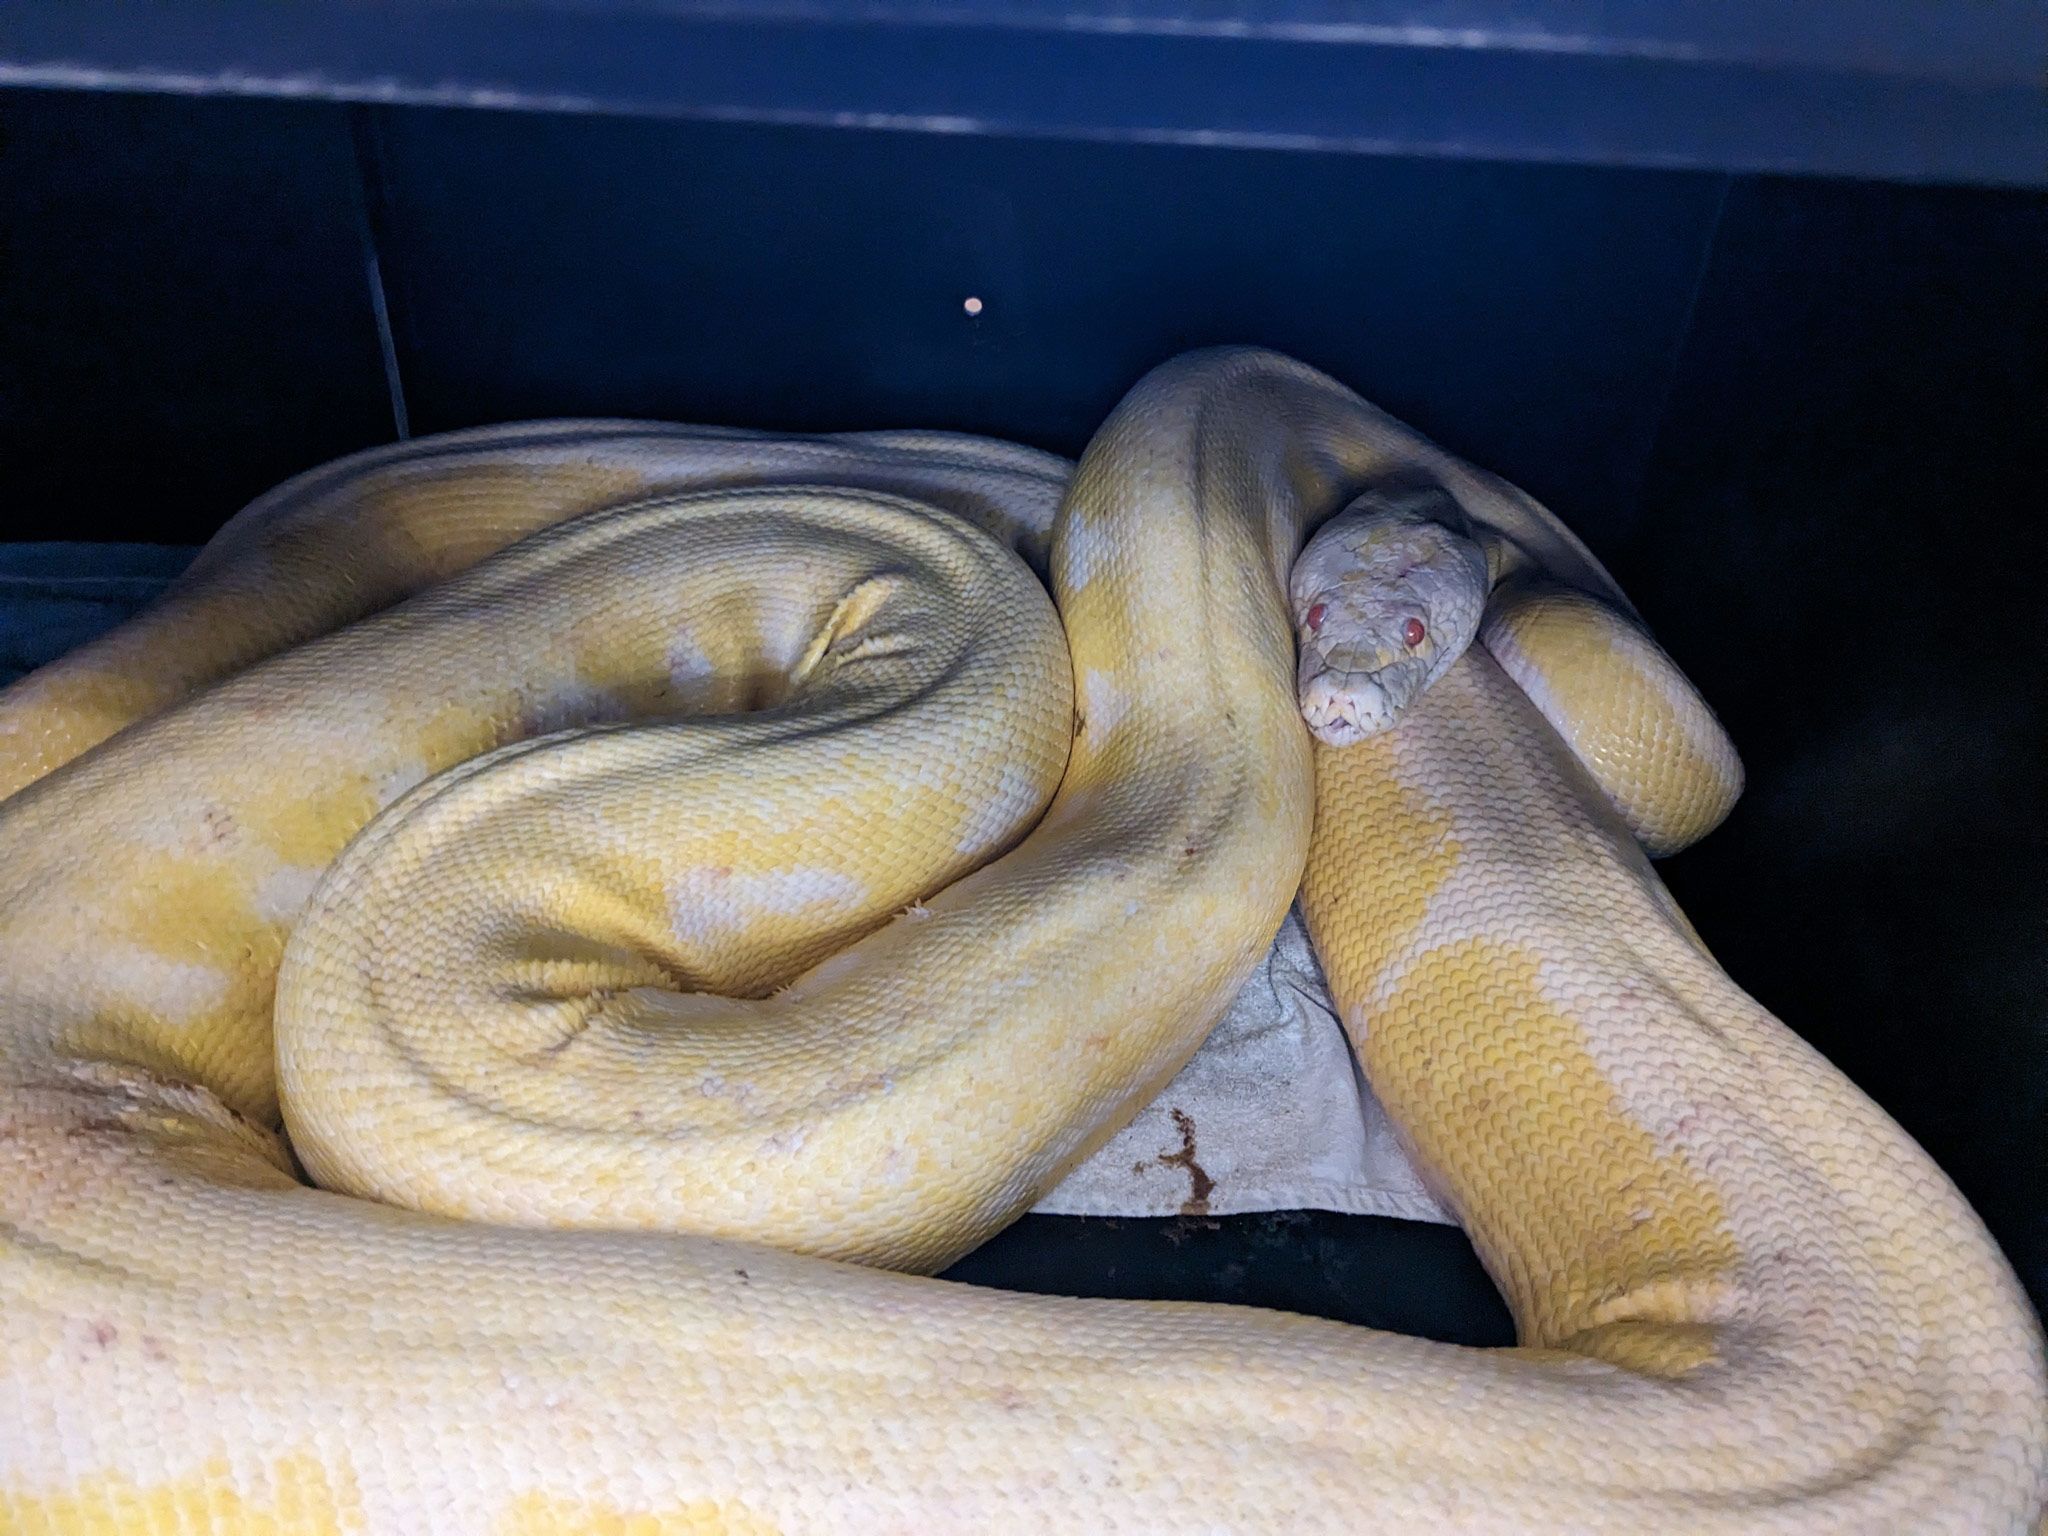 A 16-foot reticulated python was rescued in Austin, Texas after being  missing for months | CNN